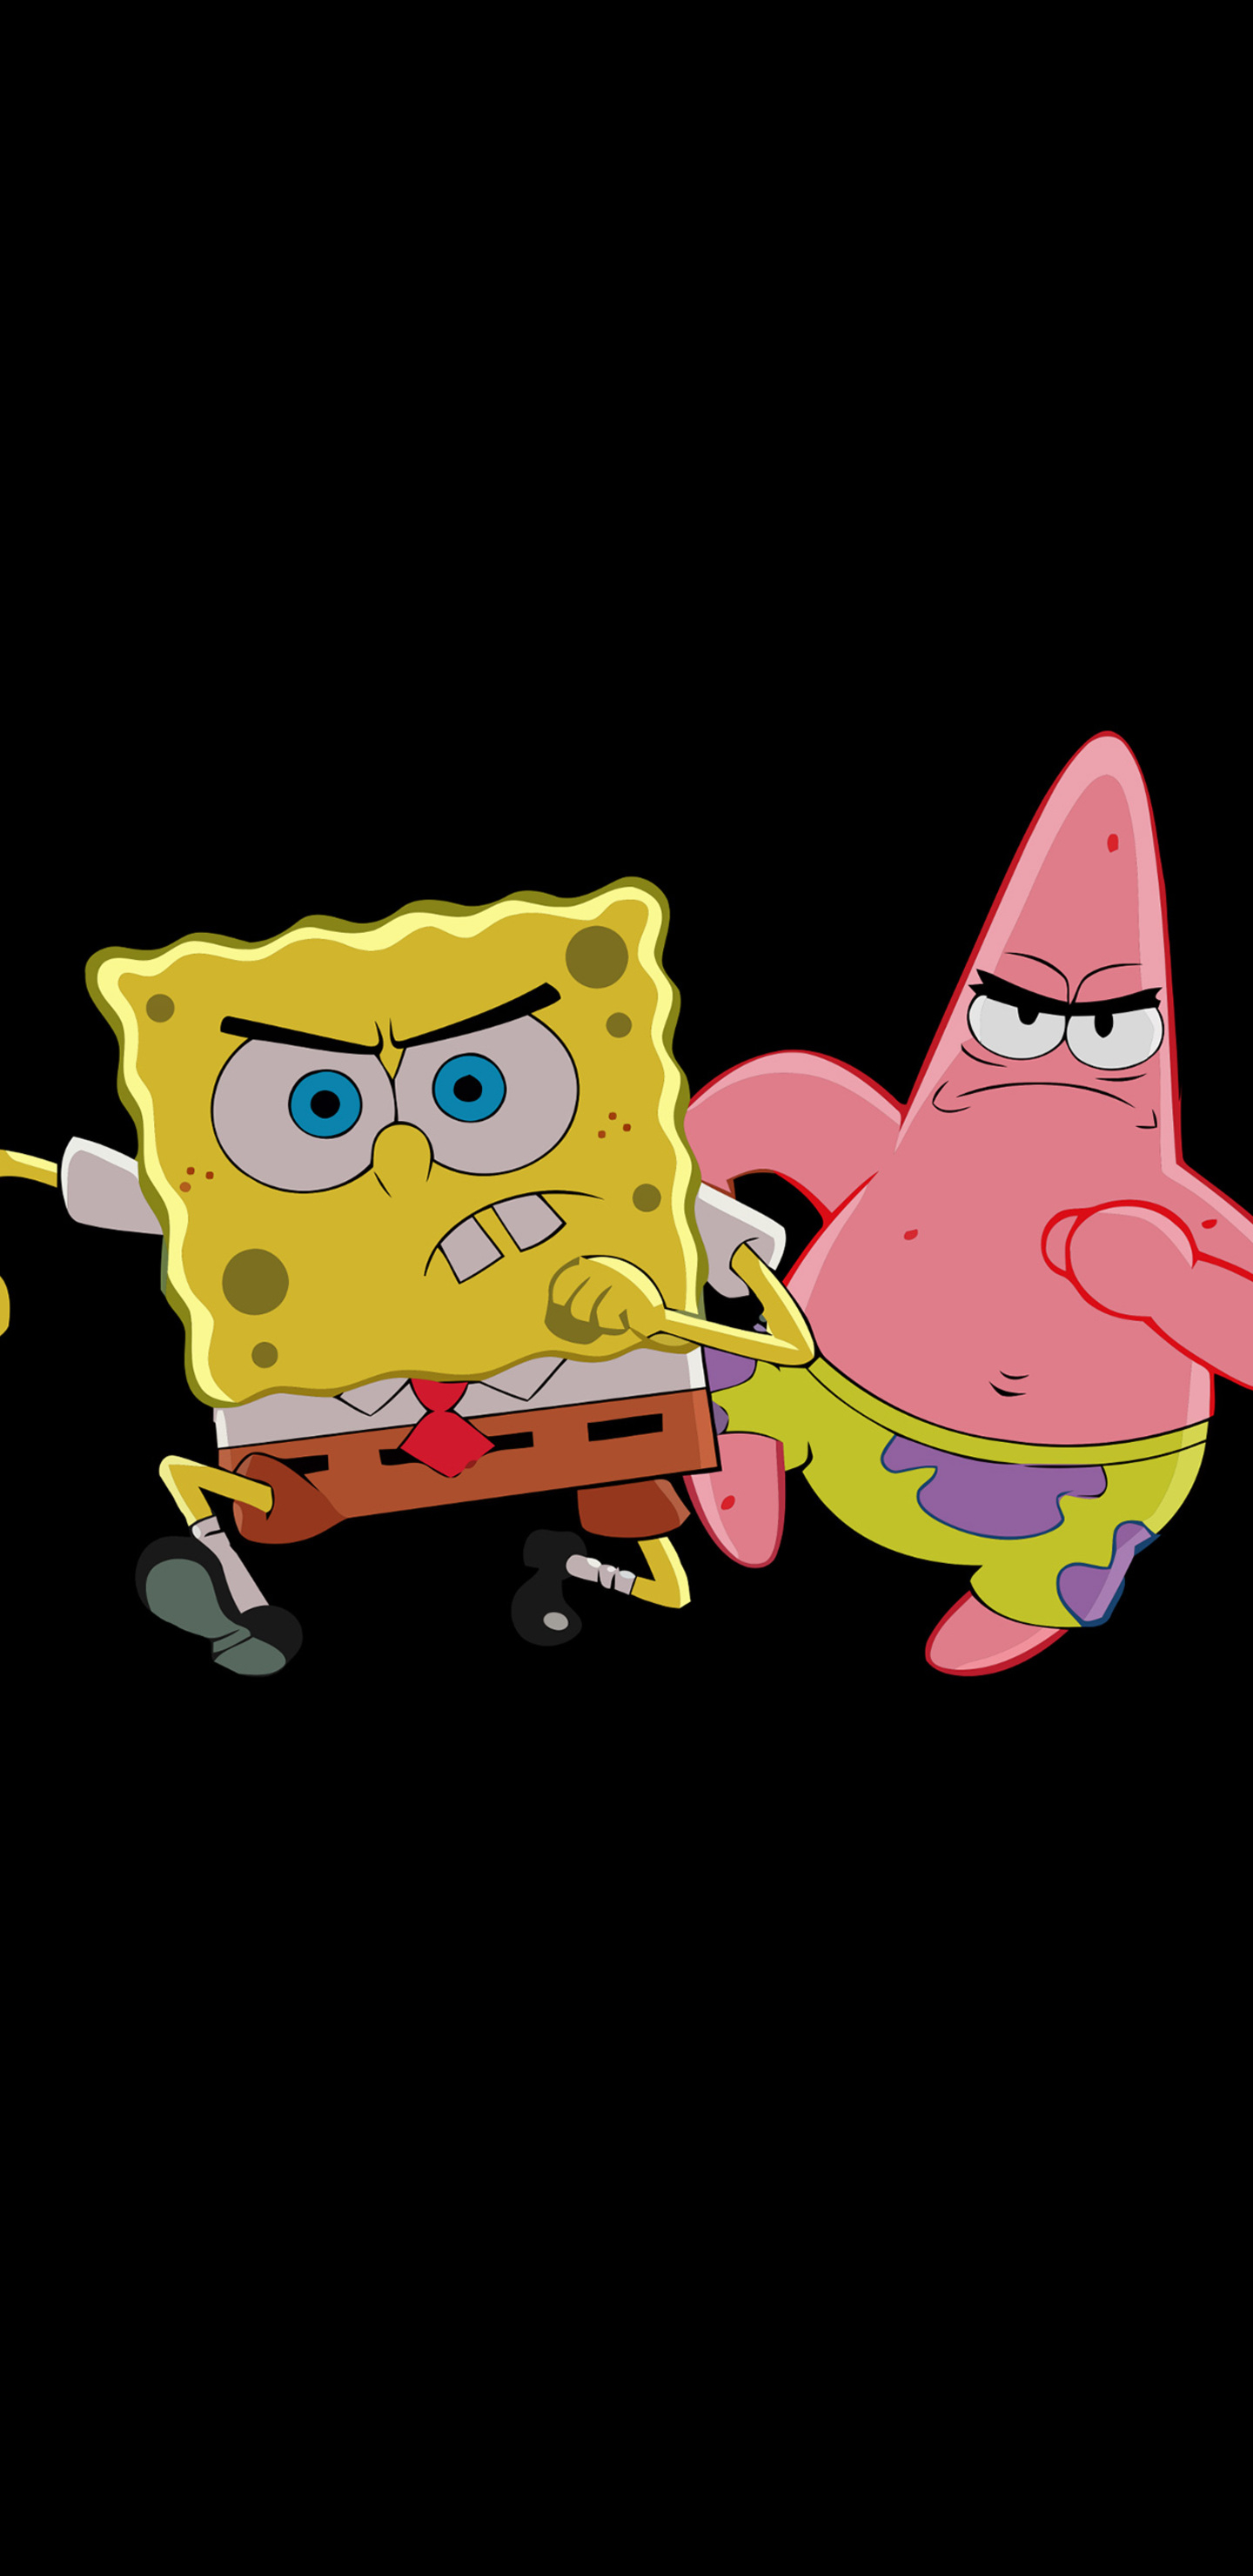 1440x2960 Patrick Star And Spongebob Samsung Galaxy Note 9,8, S9,S8,S8+ QHD HD 4k Wallpapers, Images, Backgrounds, Photos and Pictures